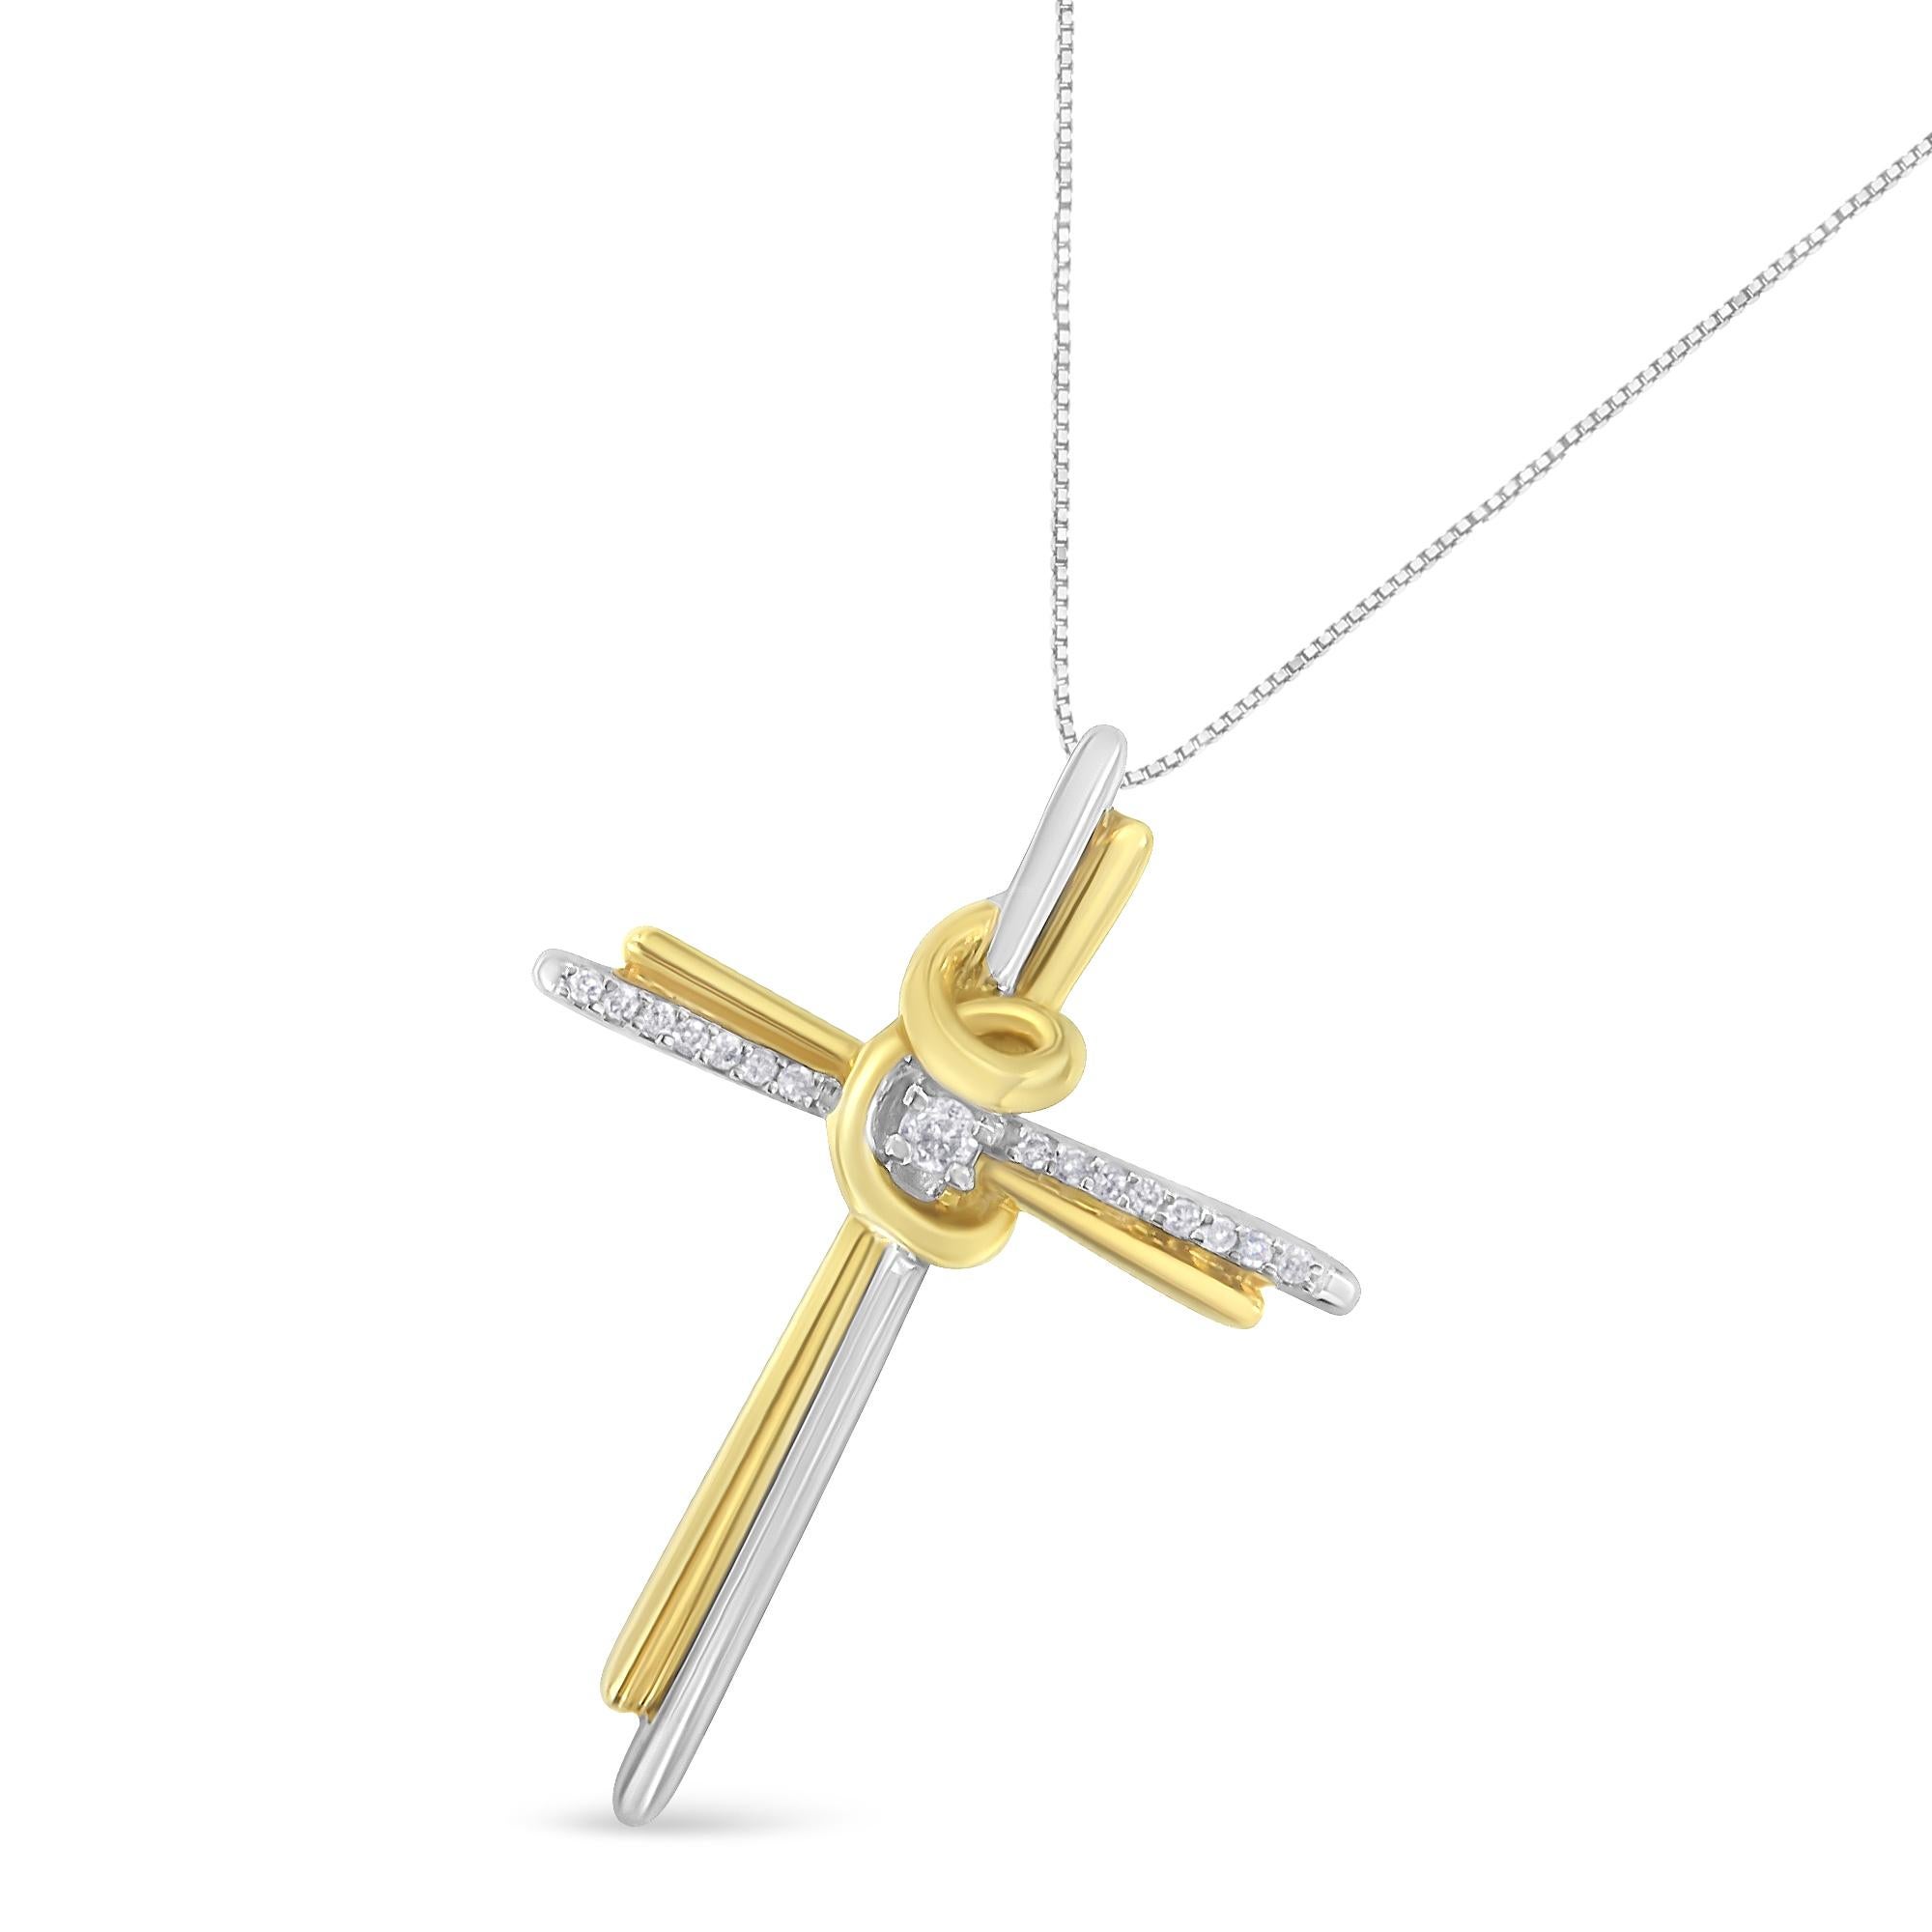 Elegantly express your faith with this exquisite 10k Two-Toned Gold Double Cross Diamond Pendant, inspired by the enchanting swirl motif of Espira. The pendant features a captivating swirl accent at its center, symbolizing the graceful flow of life